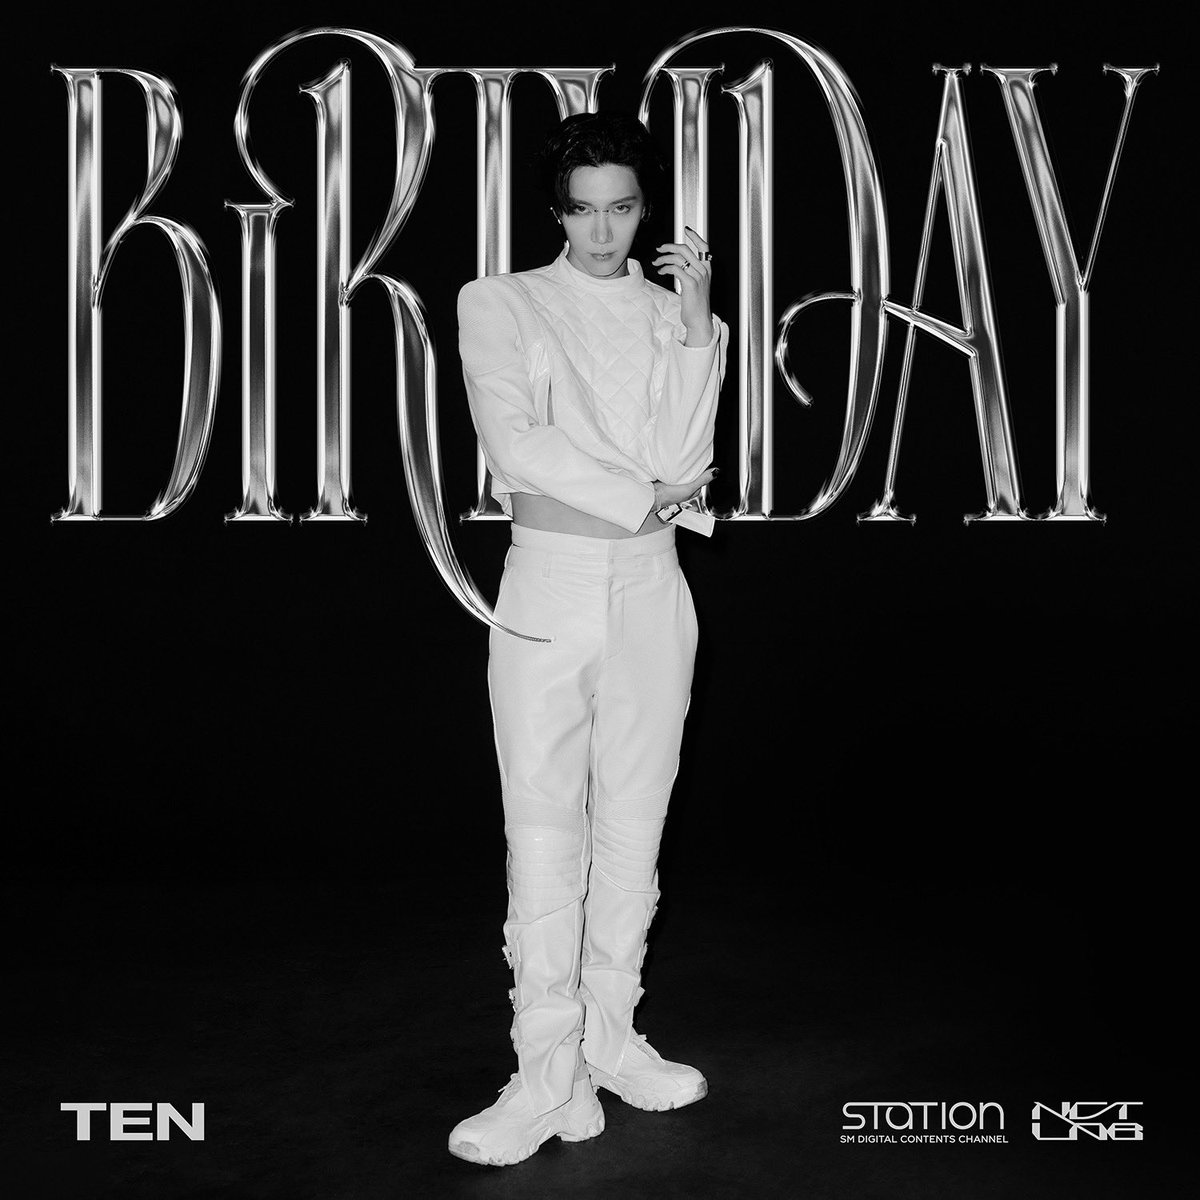 SM 'STATION: NCT LAB' TEN’s solo song 'Birthday' is out today at 6PM (KST)! - Delicate vocals - Sensual performance - Romantic and dreamy vibes bit.ly/3FlGHwm #TEN #텐 #Birthday #TEN_Birthday #NCT #WayV #NCTLAB